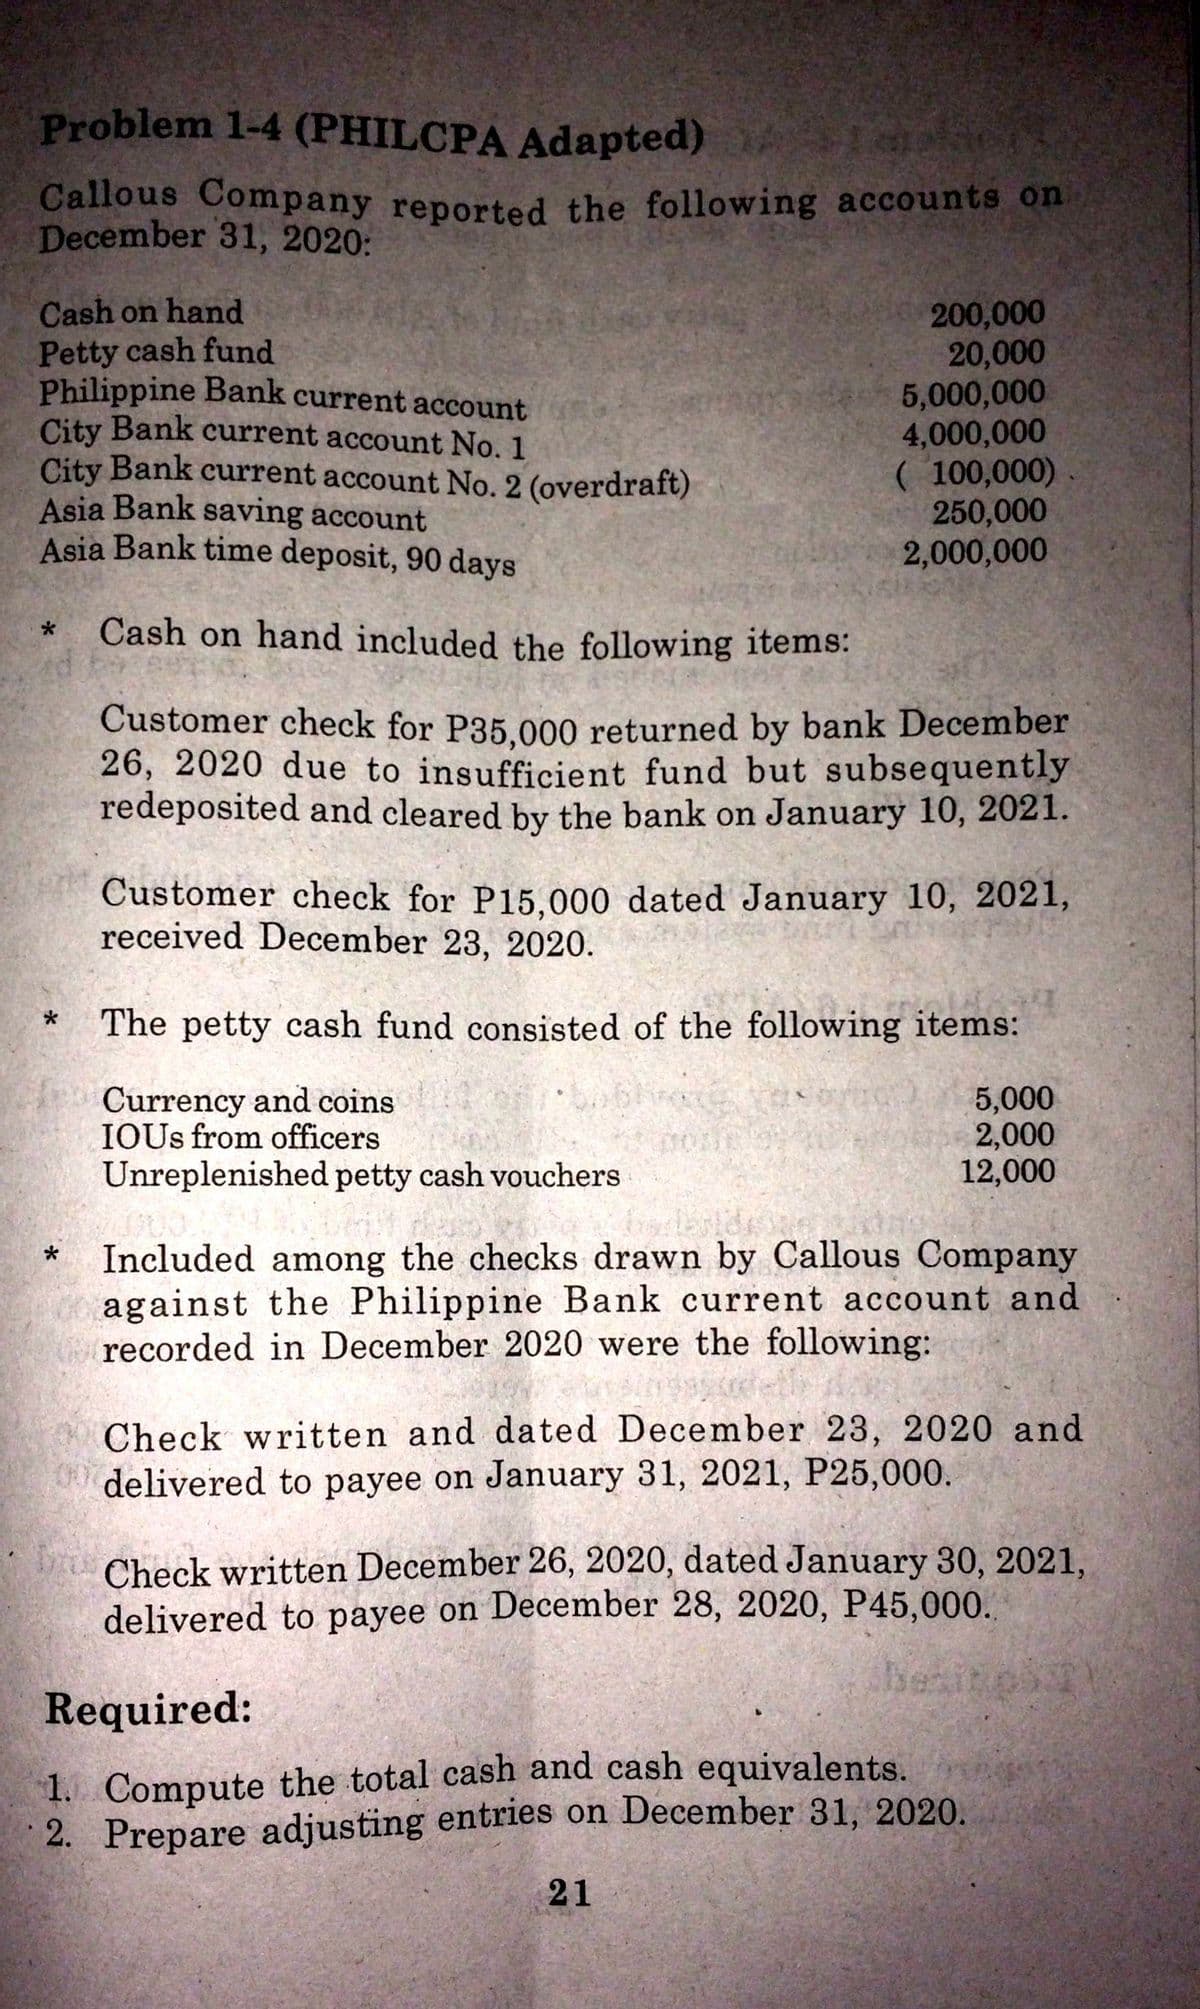 Problem 1-4 (PHILCPA Adapted)
Callous Company reported the following accounts on
December 31, 2020:
Cash on hand
Petty cash fund
Philippine Bank current account
City Bank current account No. 1
City Bank current account No. 2 (overdraft)
Asia Bank saving account
Asia Bank time deposit, 90 days
200,000
20,000
5,000,000
4,000,000
( 100,000)
250,000
2,000,000
Cash on hand included the following items:
Customer check for P35.000 returned by bank December
26, 2020 due to insufficient fund but subsequently
redeposited and cleared by the bank on January 10, 2021.
Customer check for P15,000 dated January 10, 2021,
received December 23, 2020.
The petty cash fund consisted of the following items:
Currency and coins
IQUS from officers
Unreplenished petty cash vouchers
5,000
2,000
12,000
Included among the checks drawn by Callous Company
against the Philippine Bank current account and
recorded in December 2020 were the following:
*
Check written and dated December 23, 2020 and
0 delivered to payee on January 31, 2021, P25,000.
Check written December 26, 2020, dated January 30, 2021,
delivered to payee on December 28, 2020, P45,000.
henito
Required:
1. Compute the total cash and cash equivalents.
2. Prepare adjusting entries on December 31, 2020.
21
